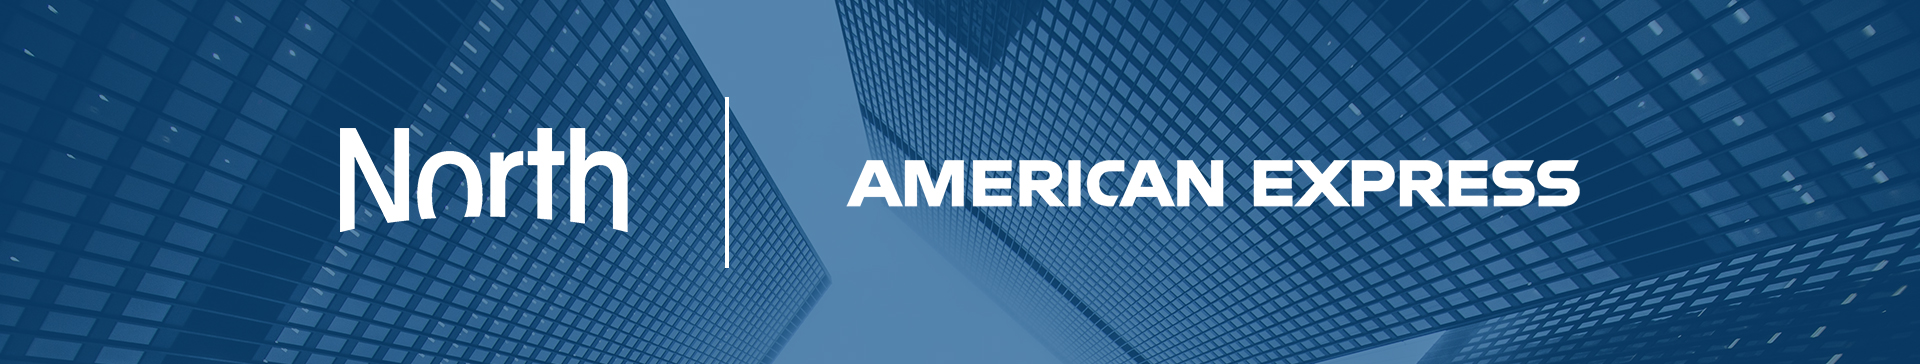 North Strategic and American Express Logos on a blue background